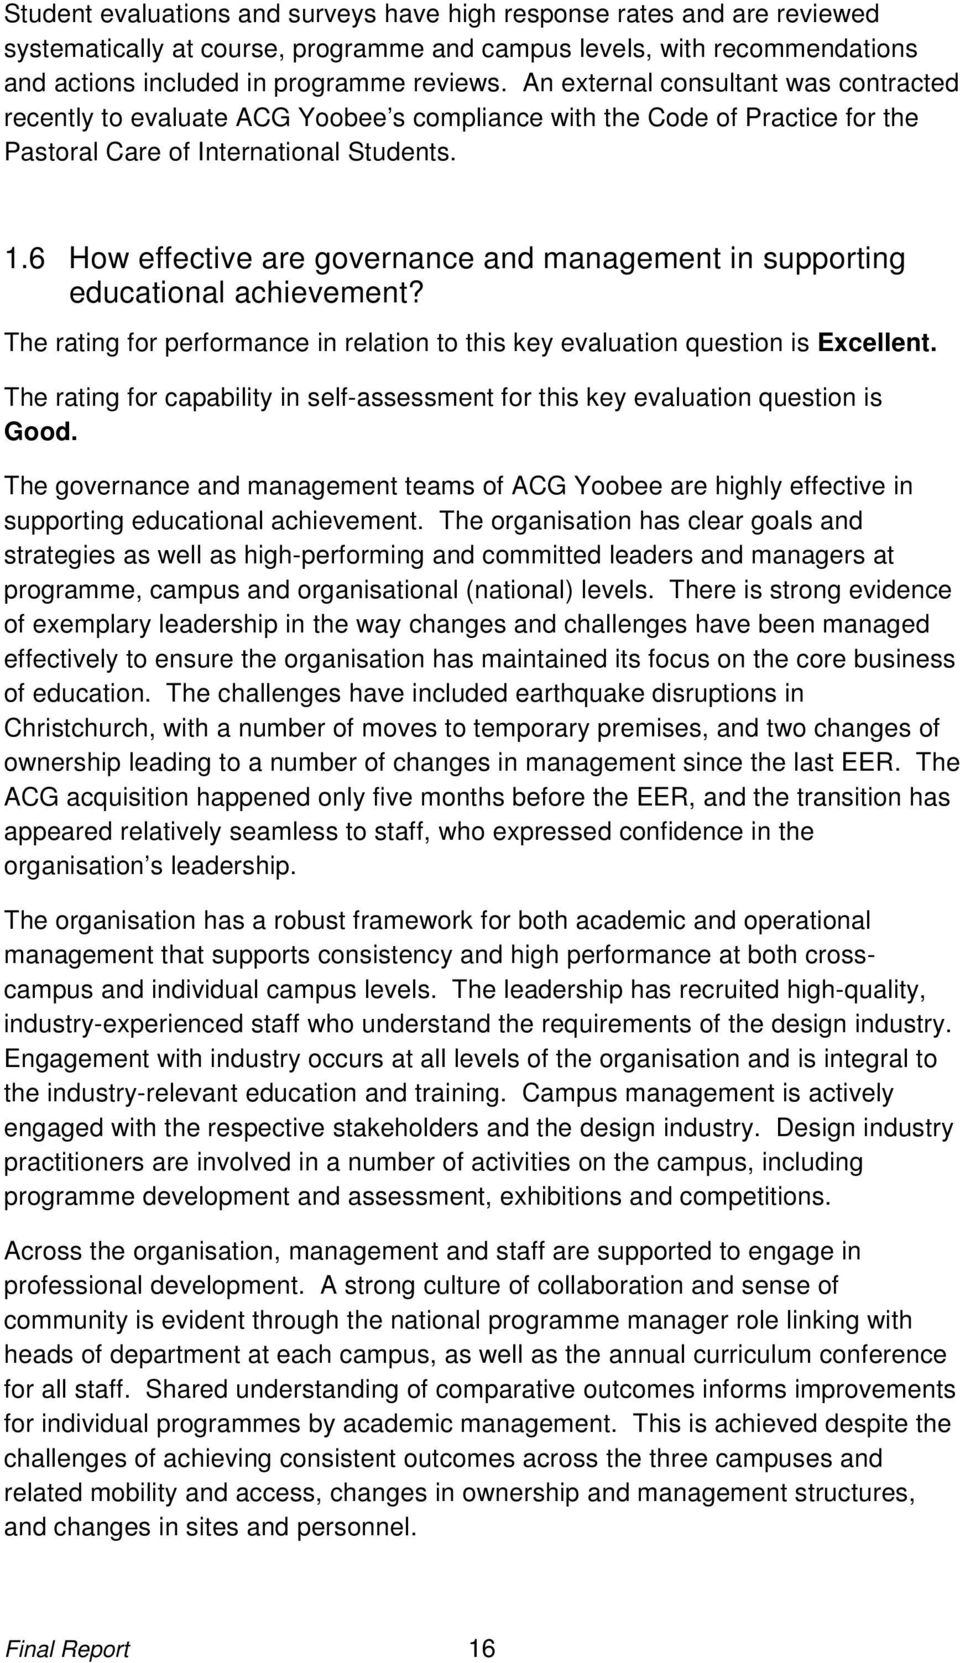 6 How effective are governance and management in supporting educational achievement? The rating for performance in relation to this key evaluation question is Excellent.